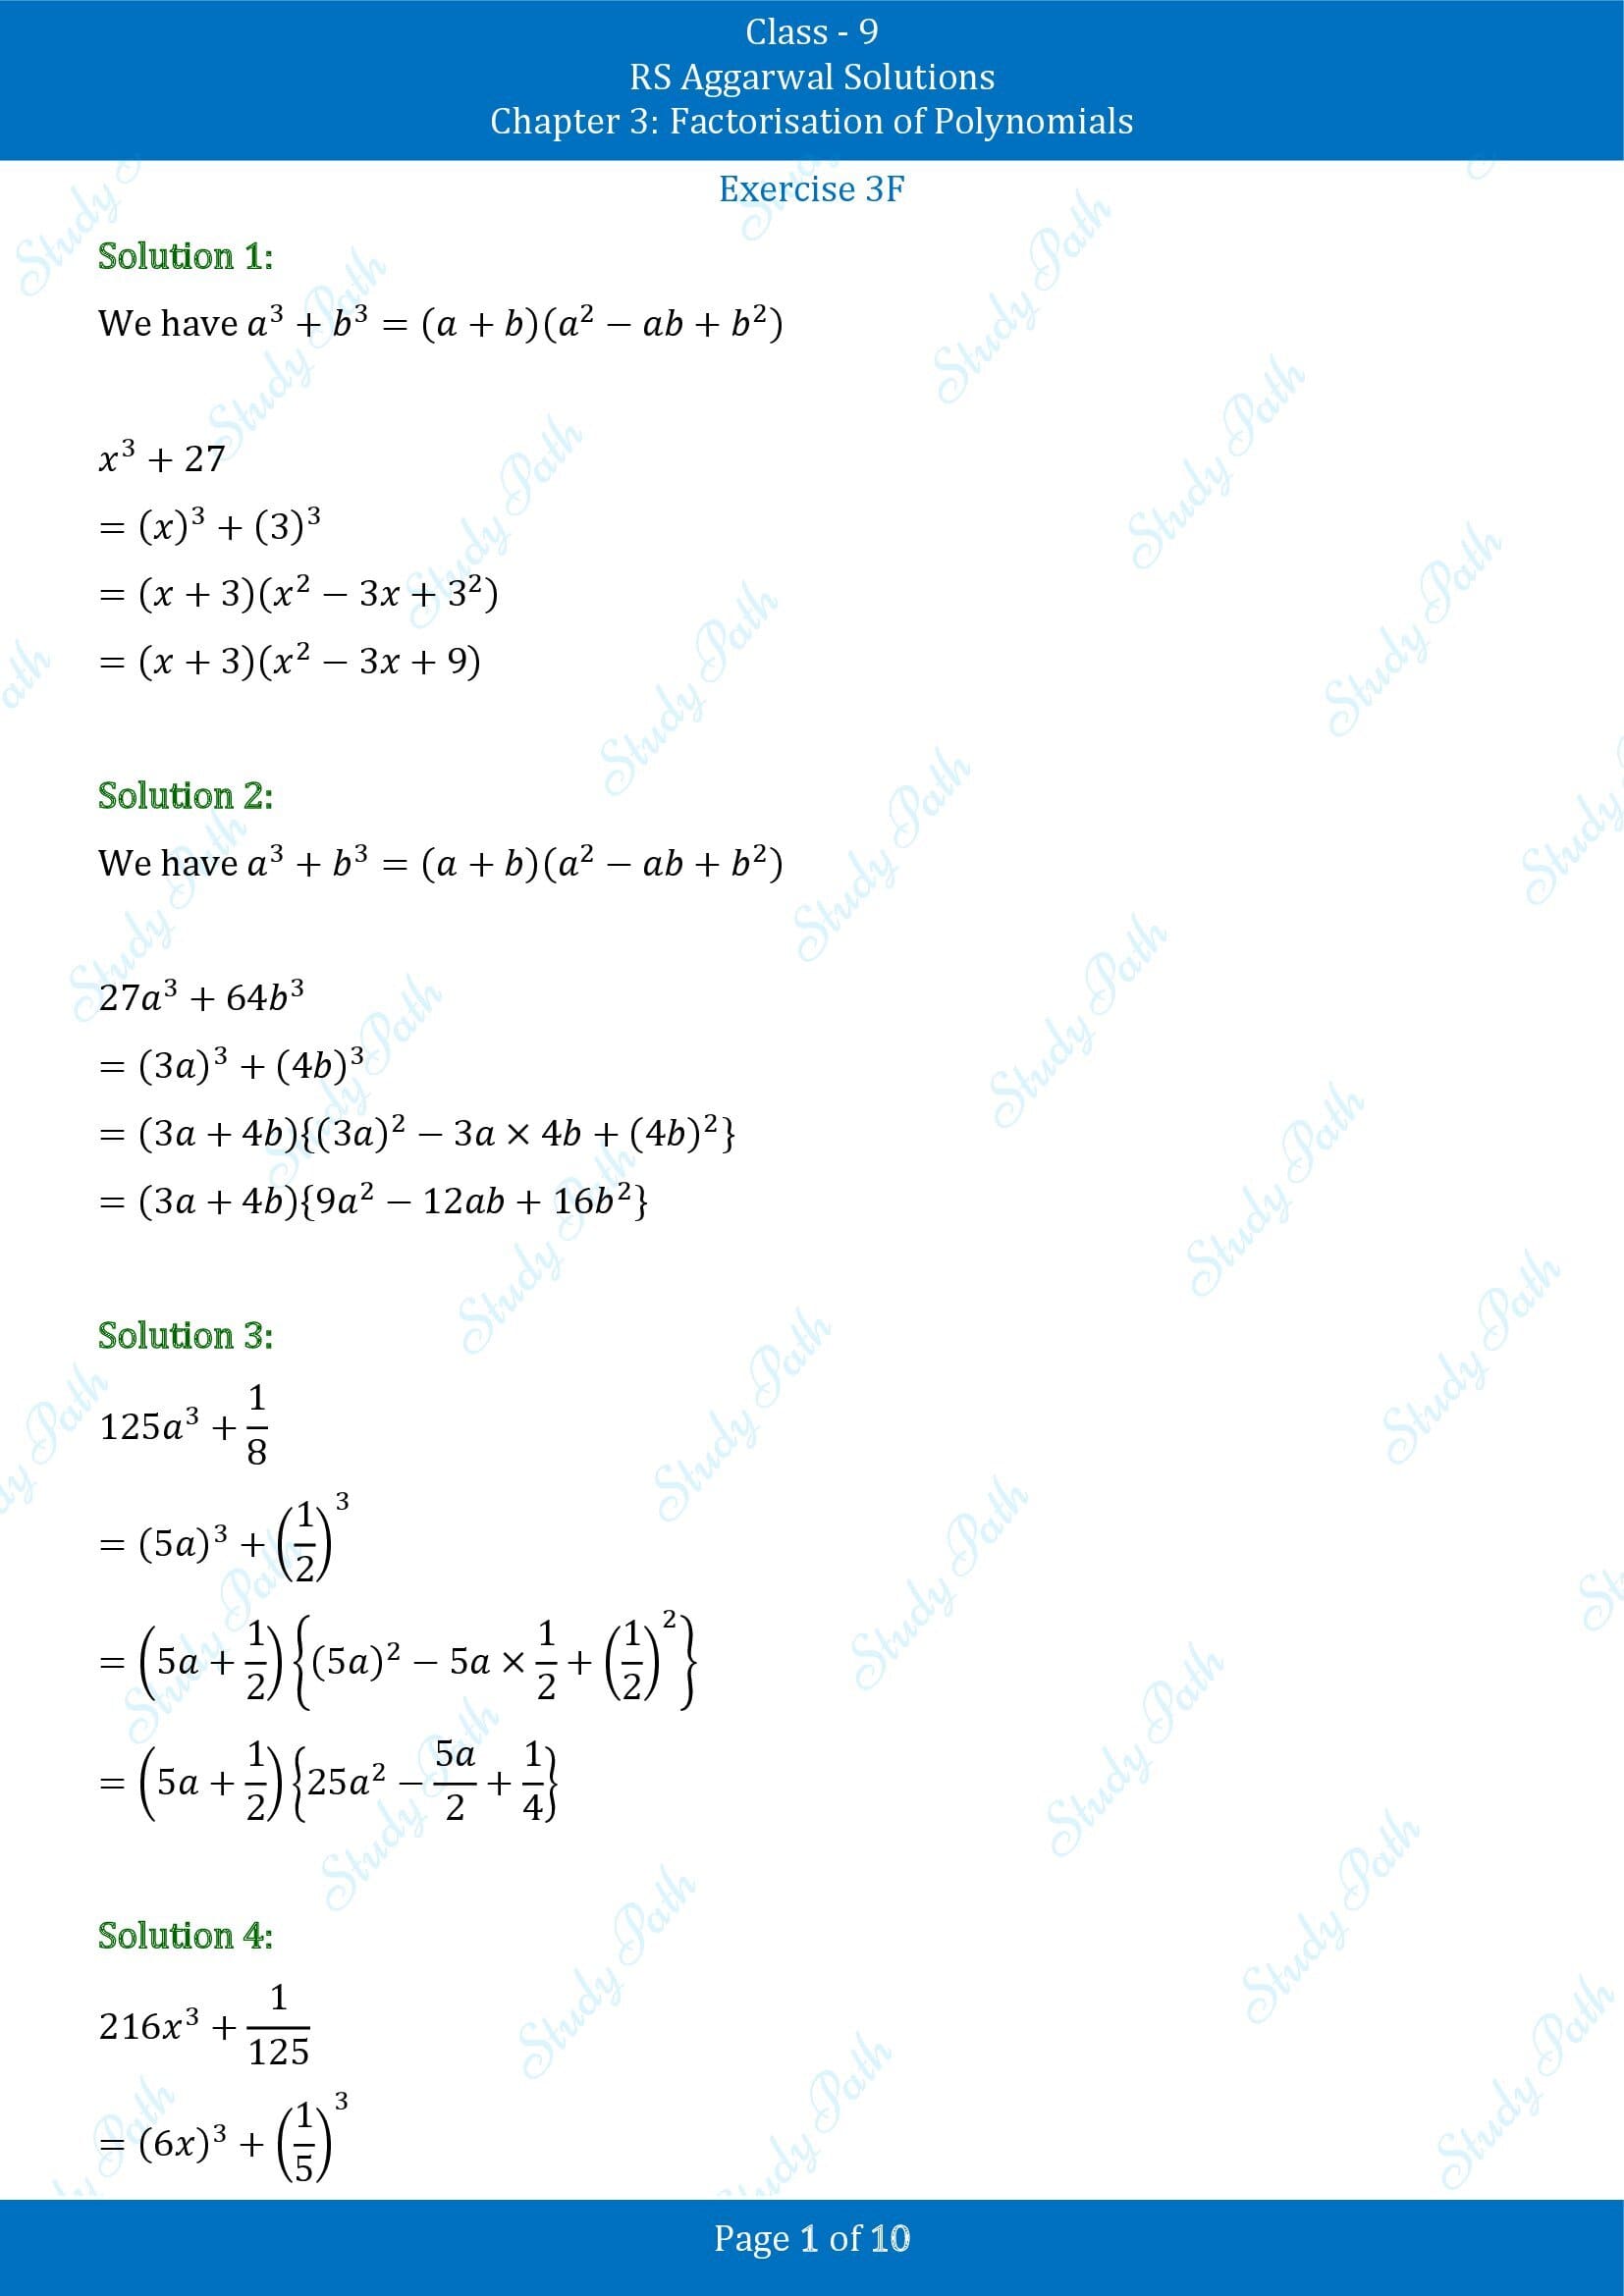 RS Aggarwal Solutions Class 9 Chapter 3 Factorisation of Polynomials Exercise 3F 00001